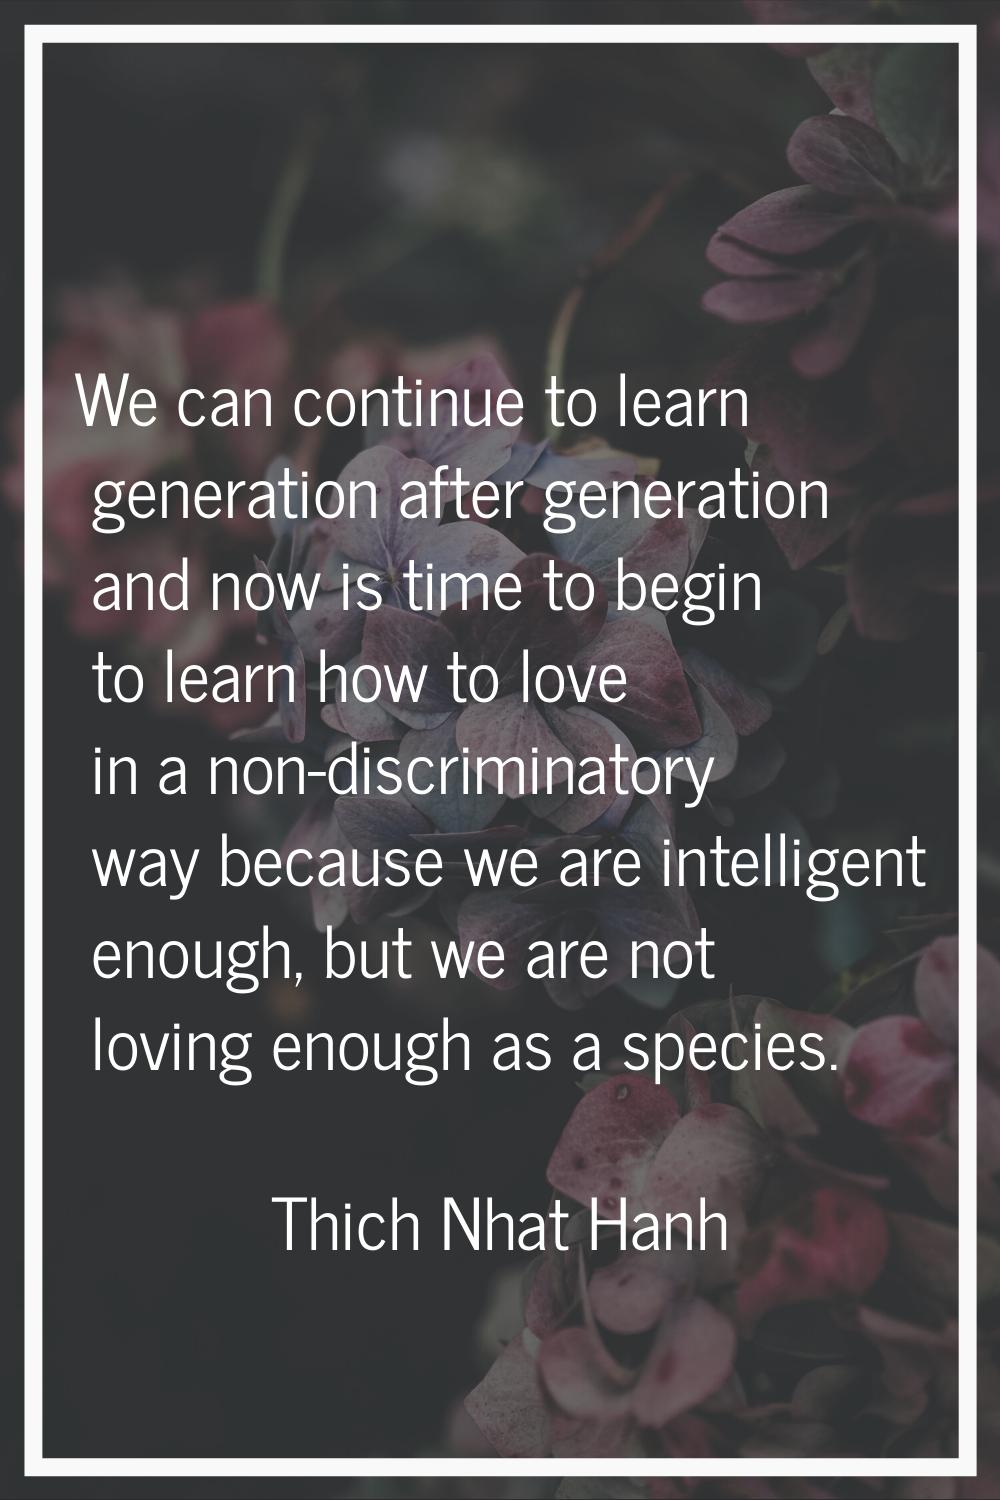 We can continue to learn generation after generation and now is time to begin to learn how to love 